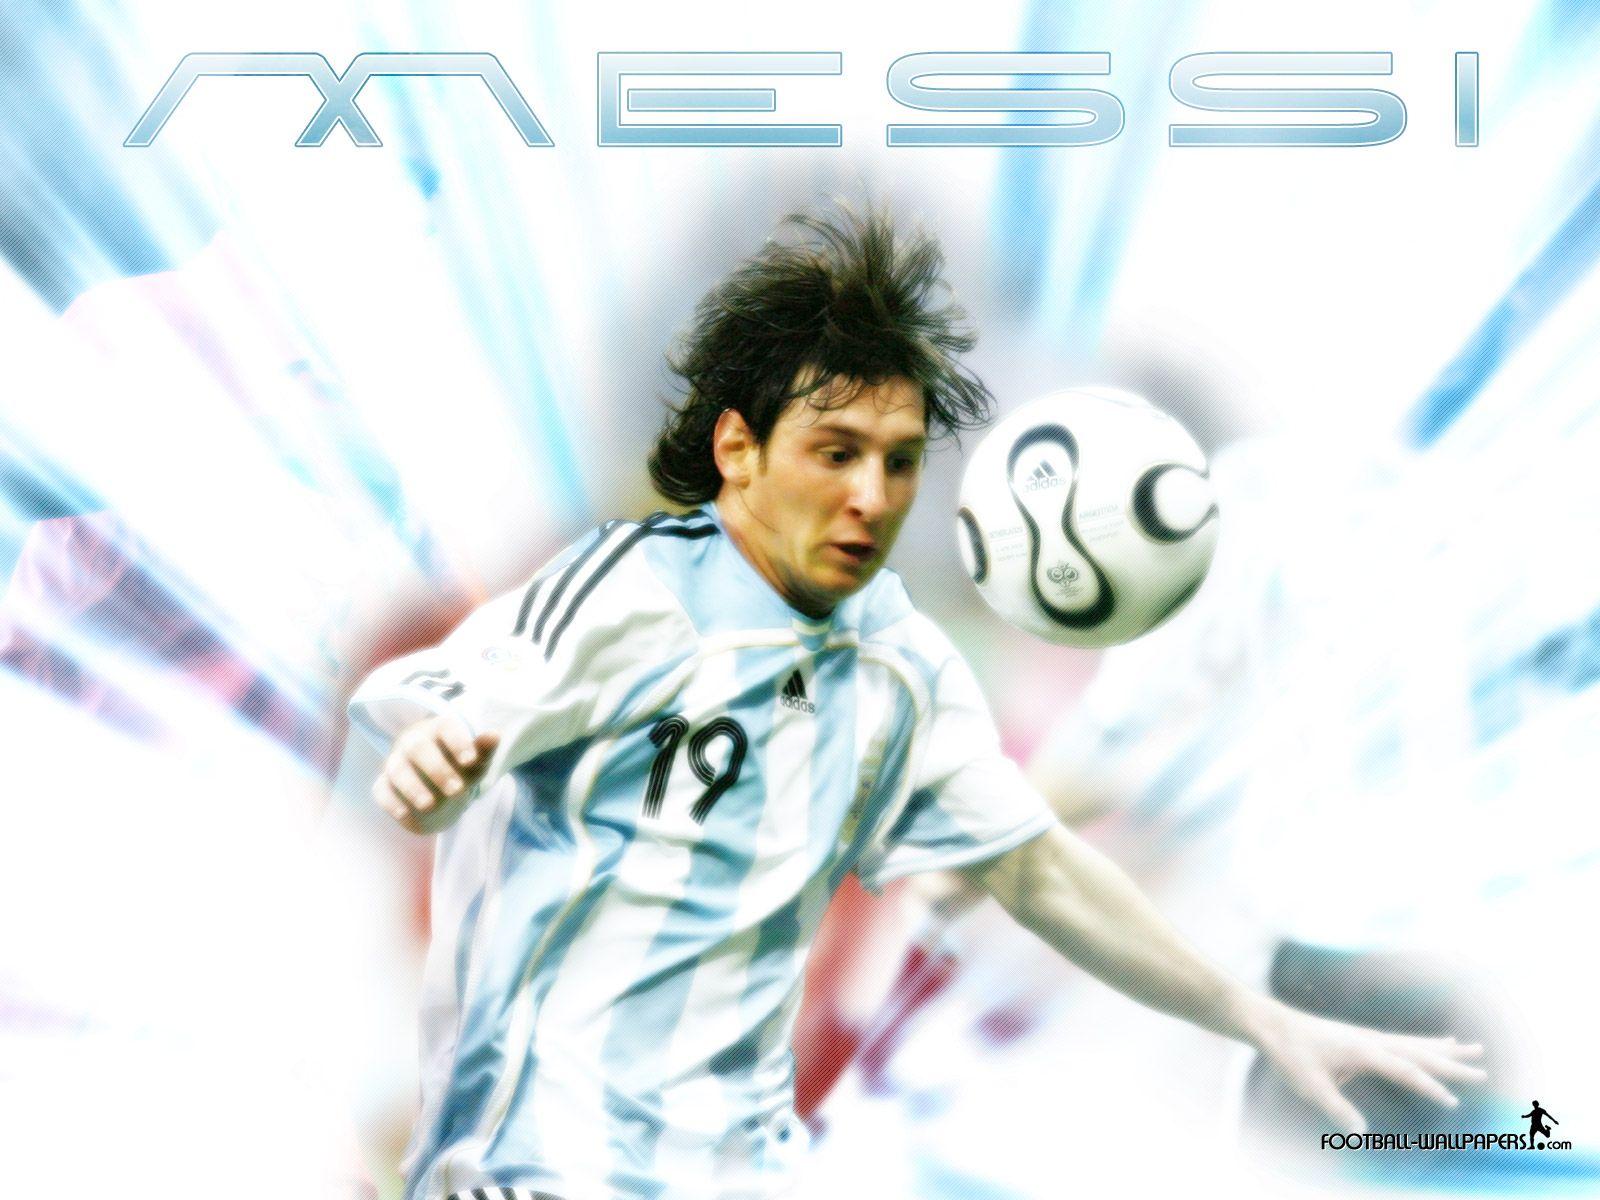 Get Ready for the World Cup With Lionel Messi Wallpaper & Themes